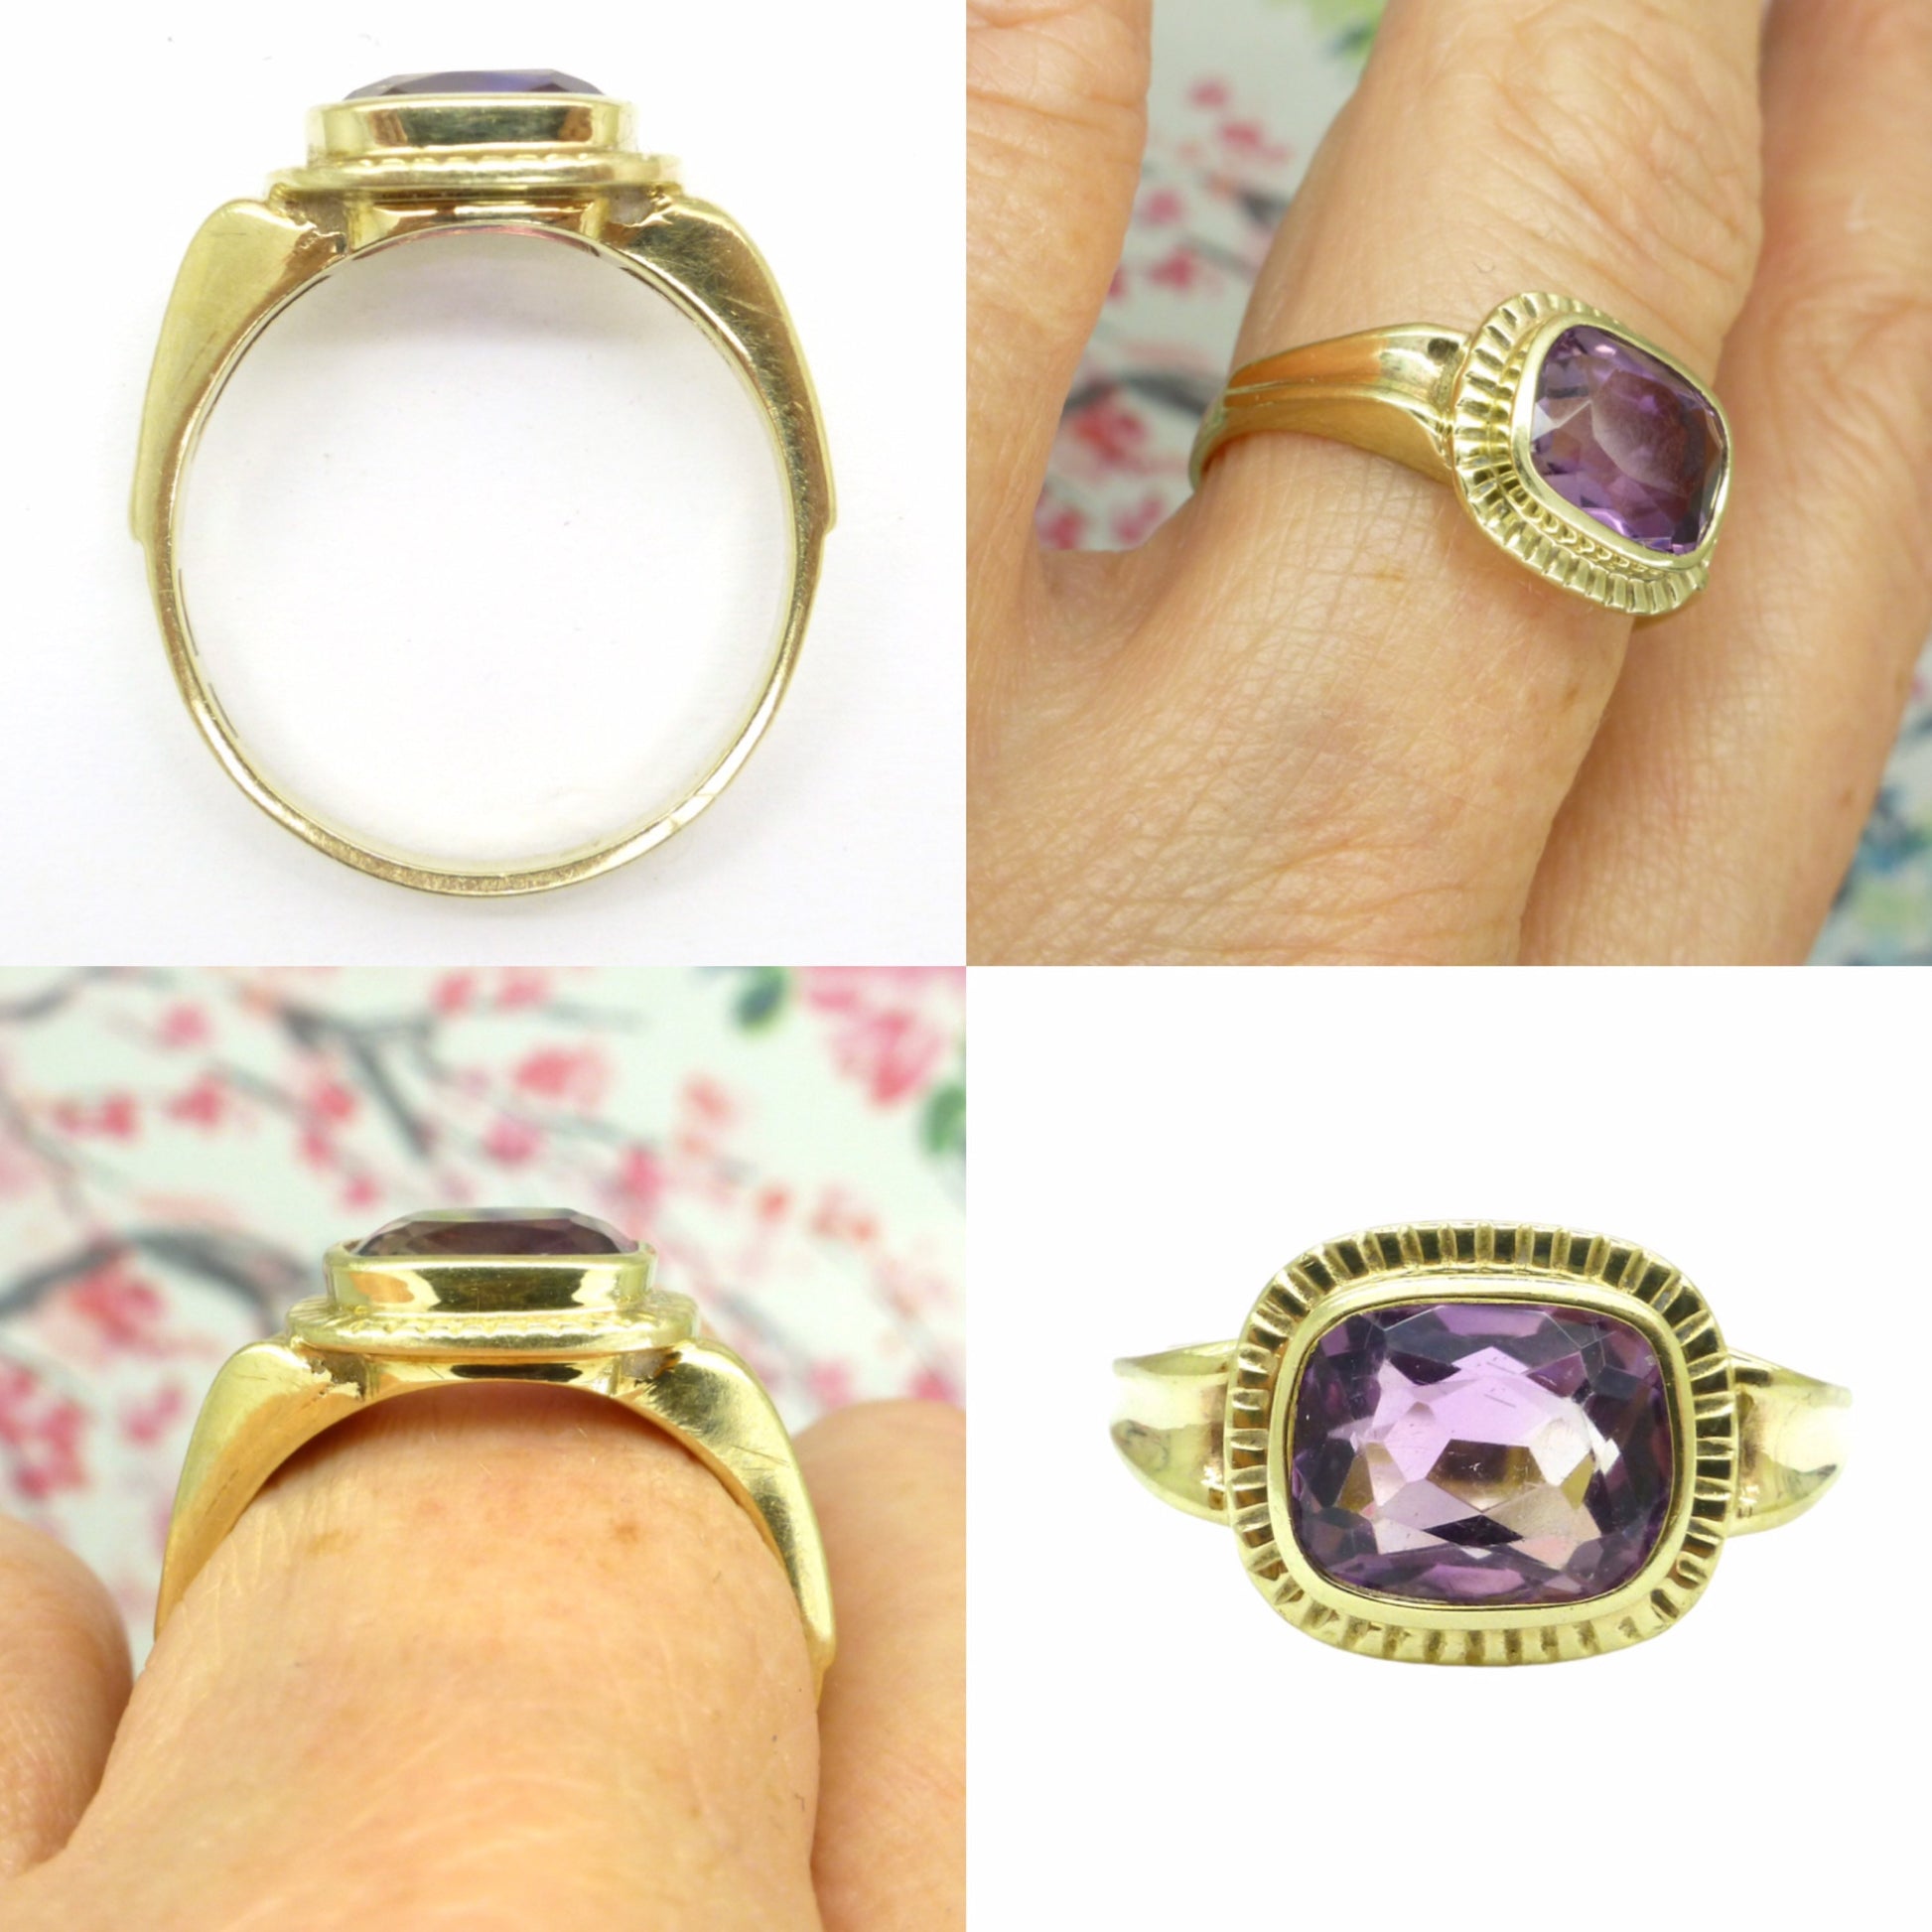 Vintage 9ct gold cushion cut Amethyst solitaire ring